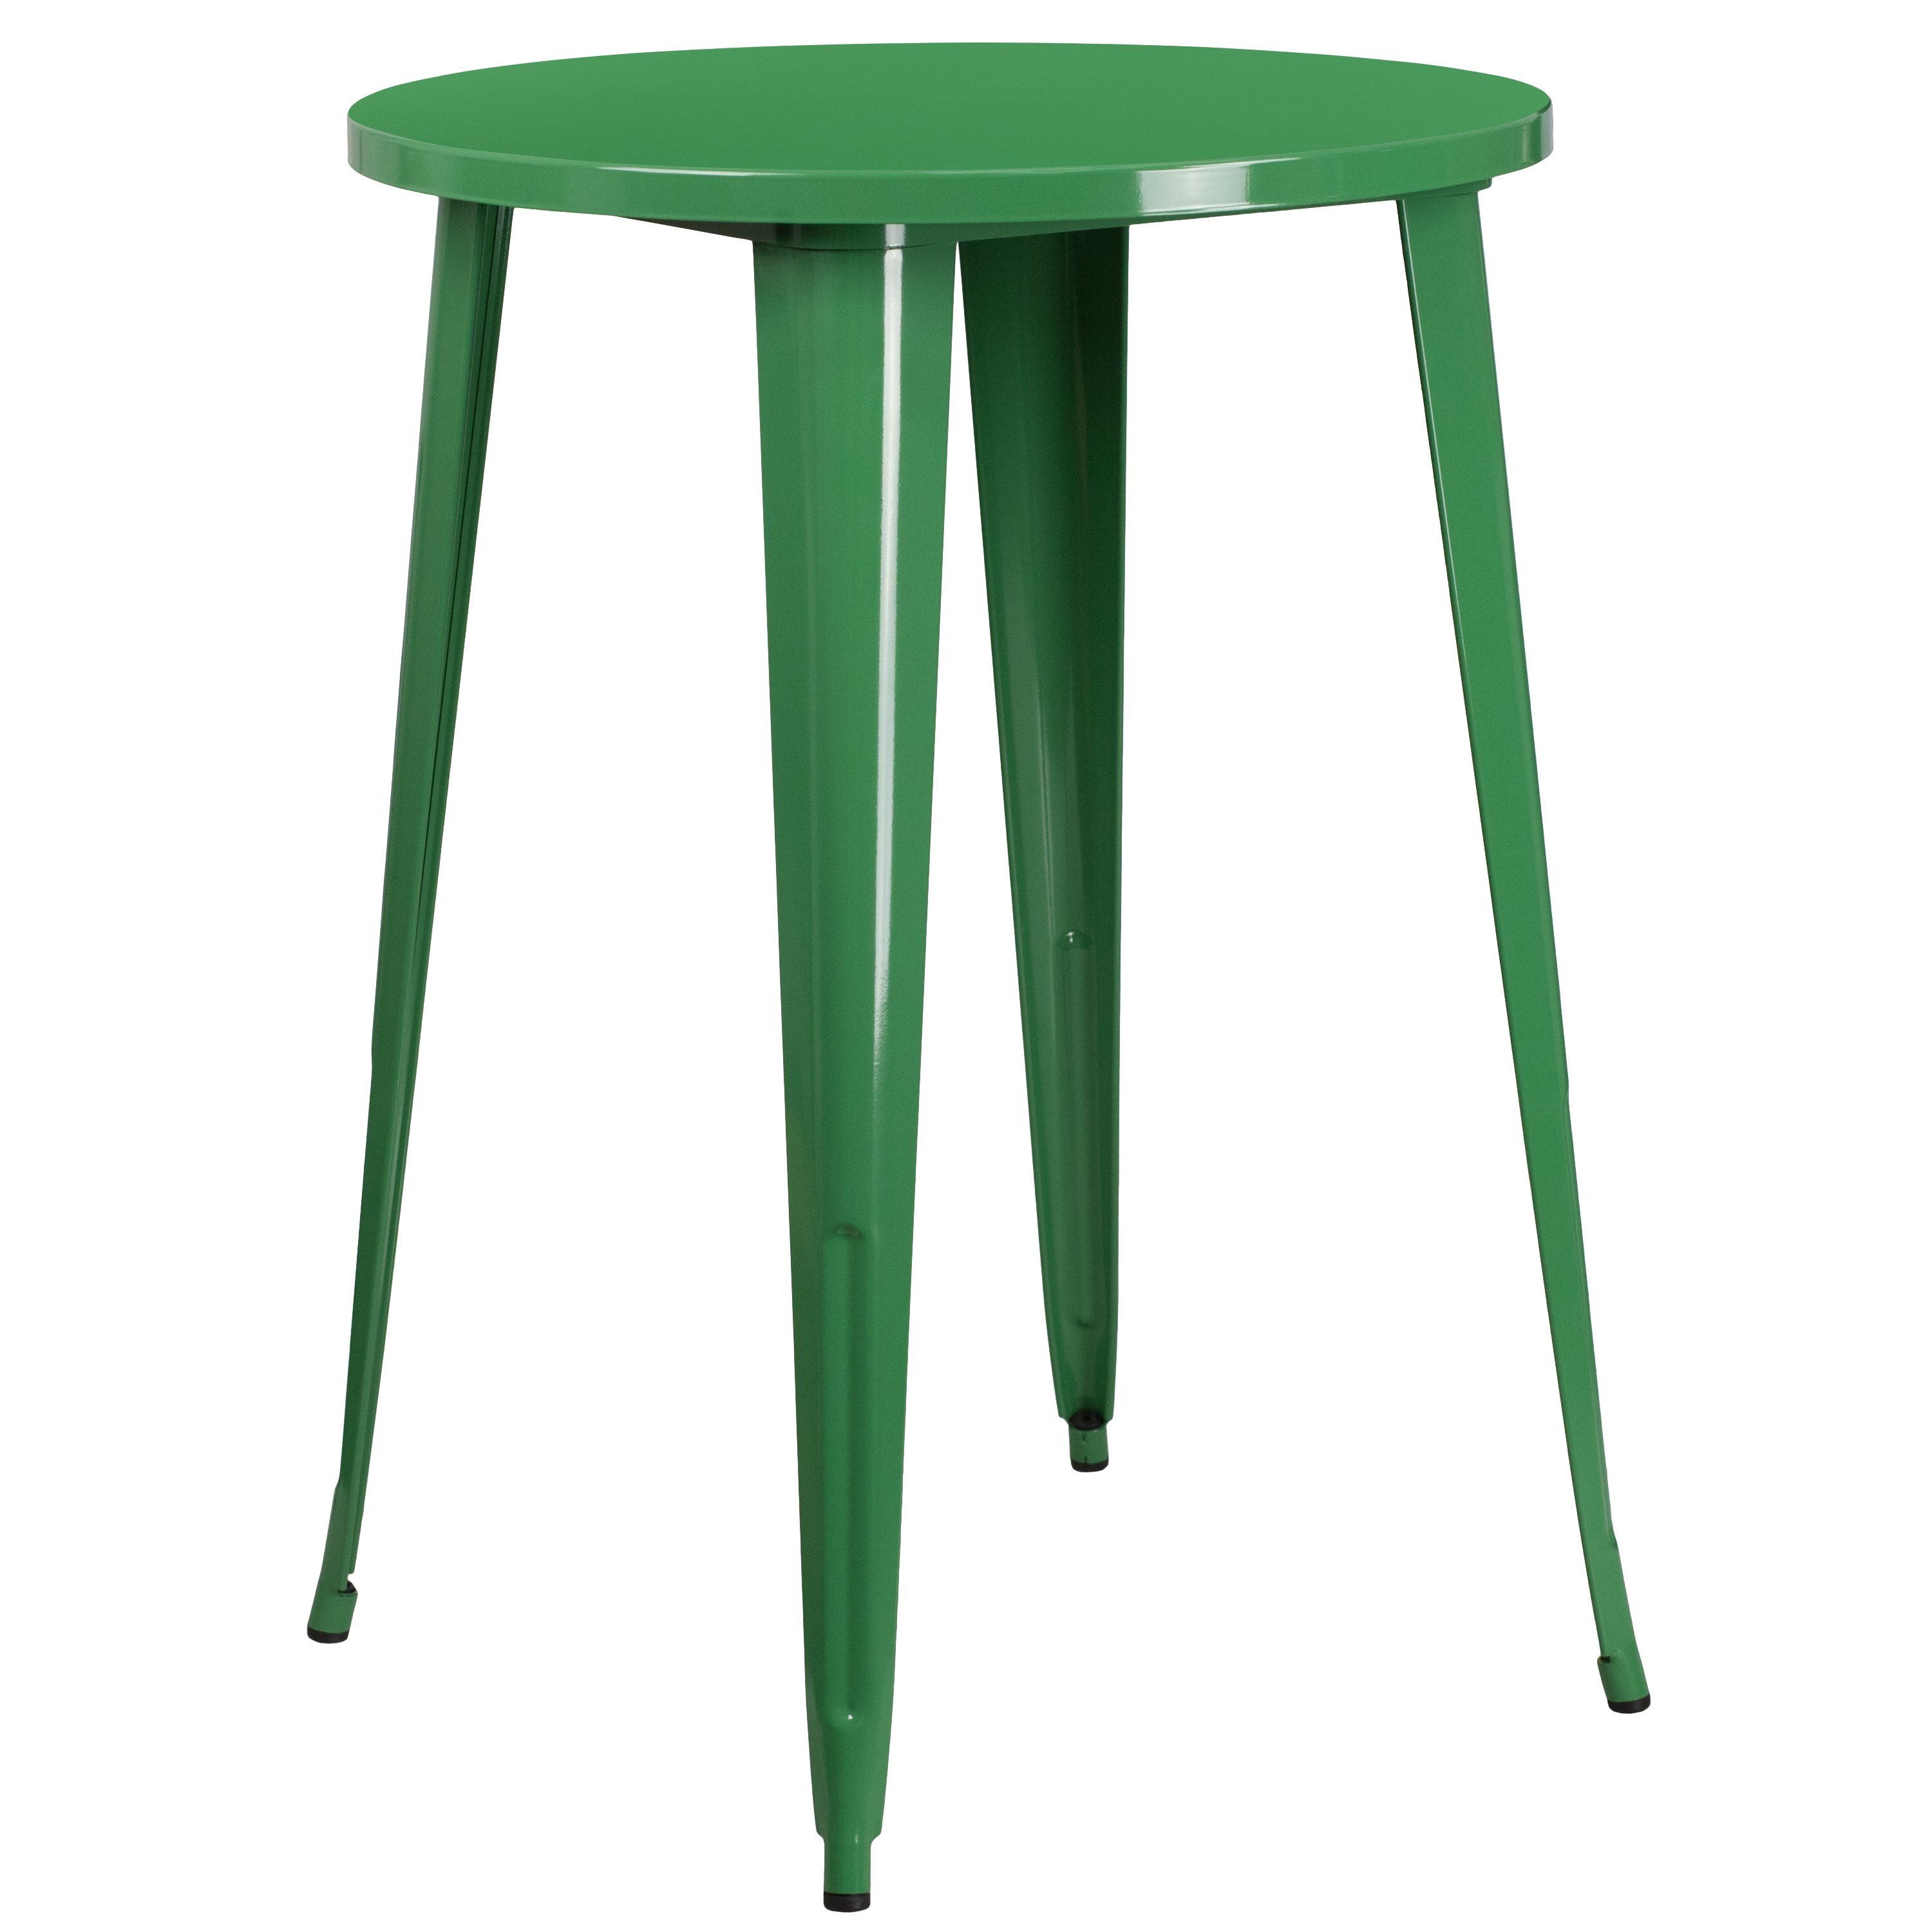 Flash Furniture Commercial Grade 30" Round Green Metal Indoor-Outdoor Bar Table Set with 2 Square Seat Backless Stools - image 4 of 5